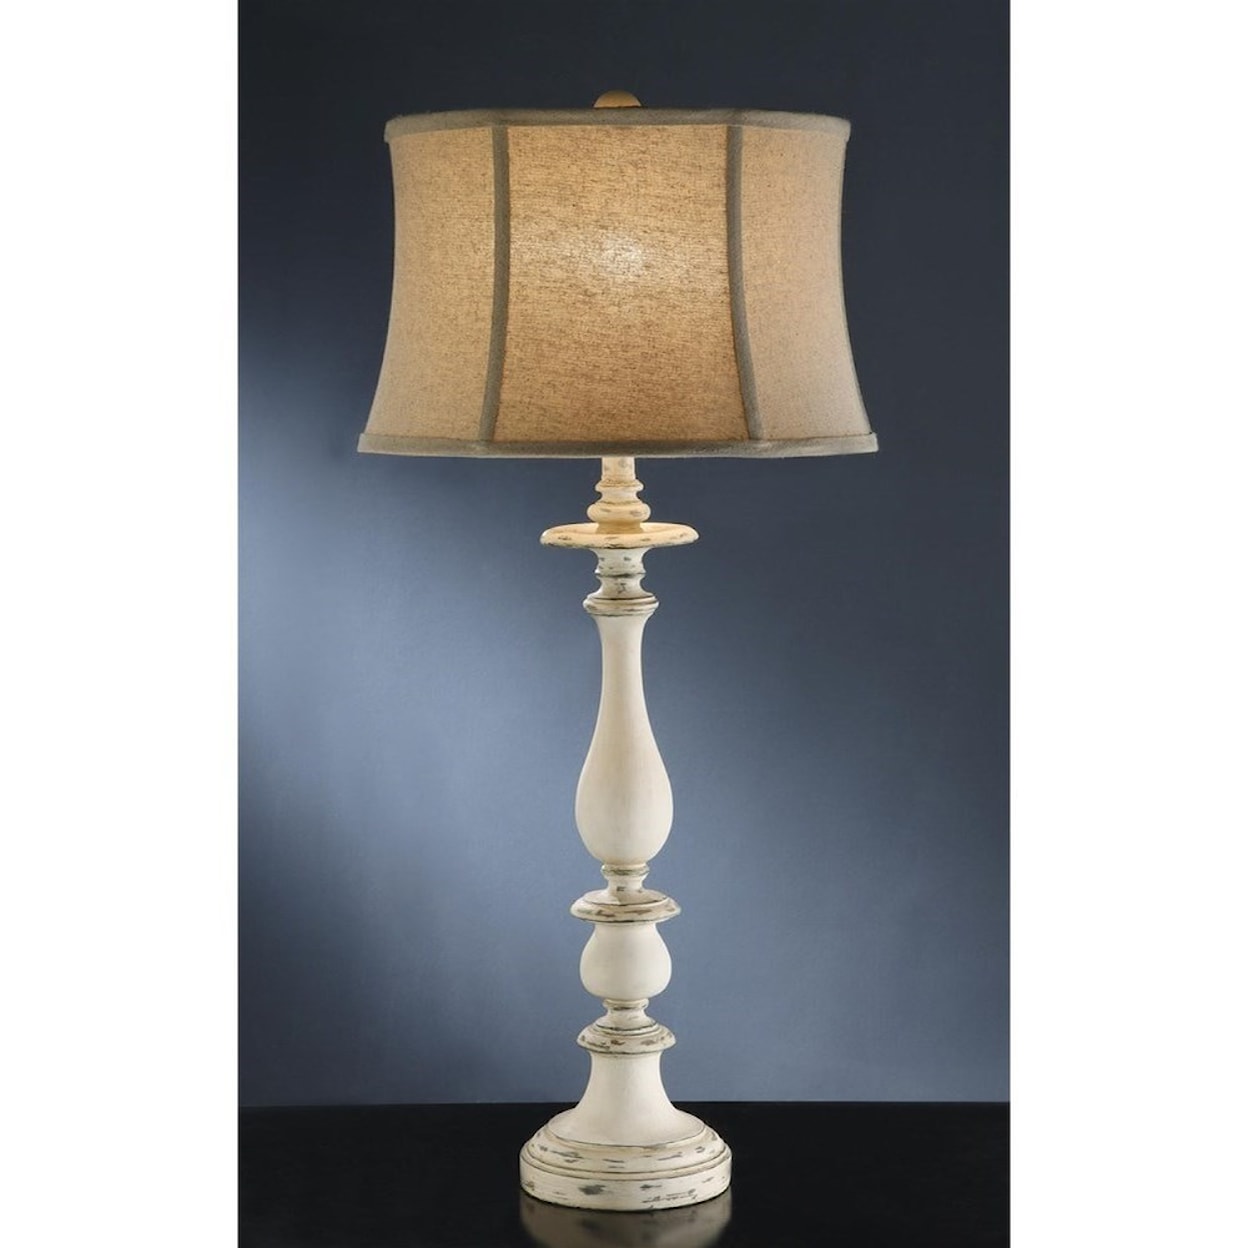 Crestview Collection Lighting Summerland Table Lamp